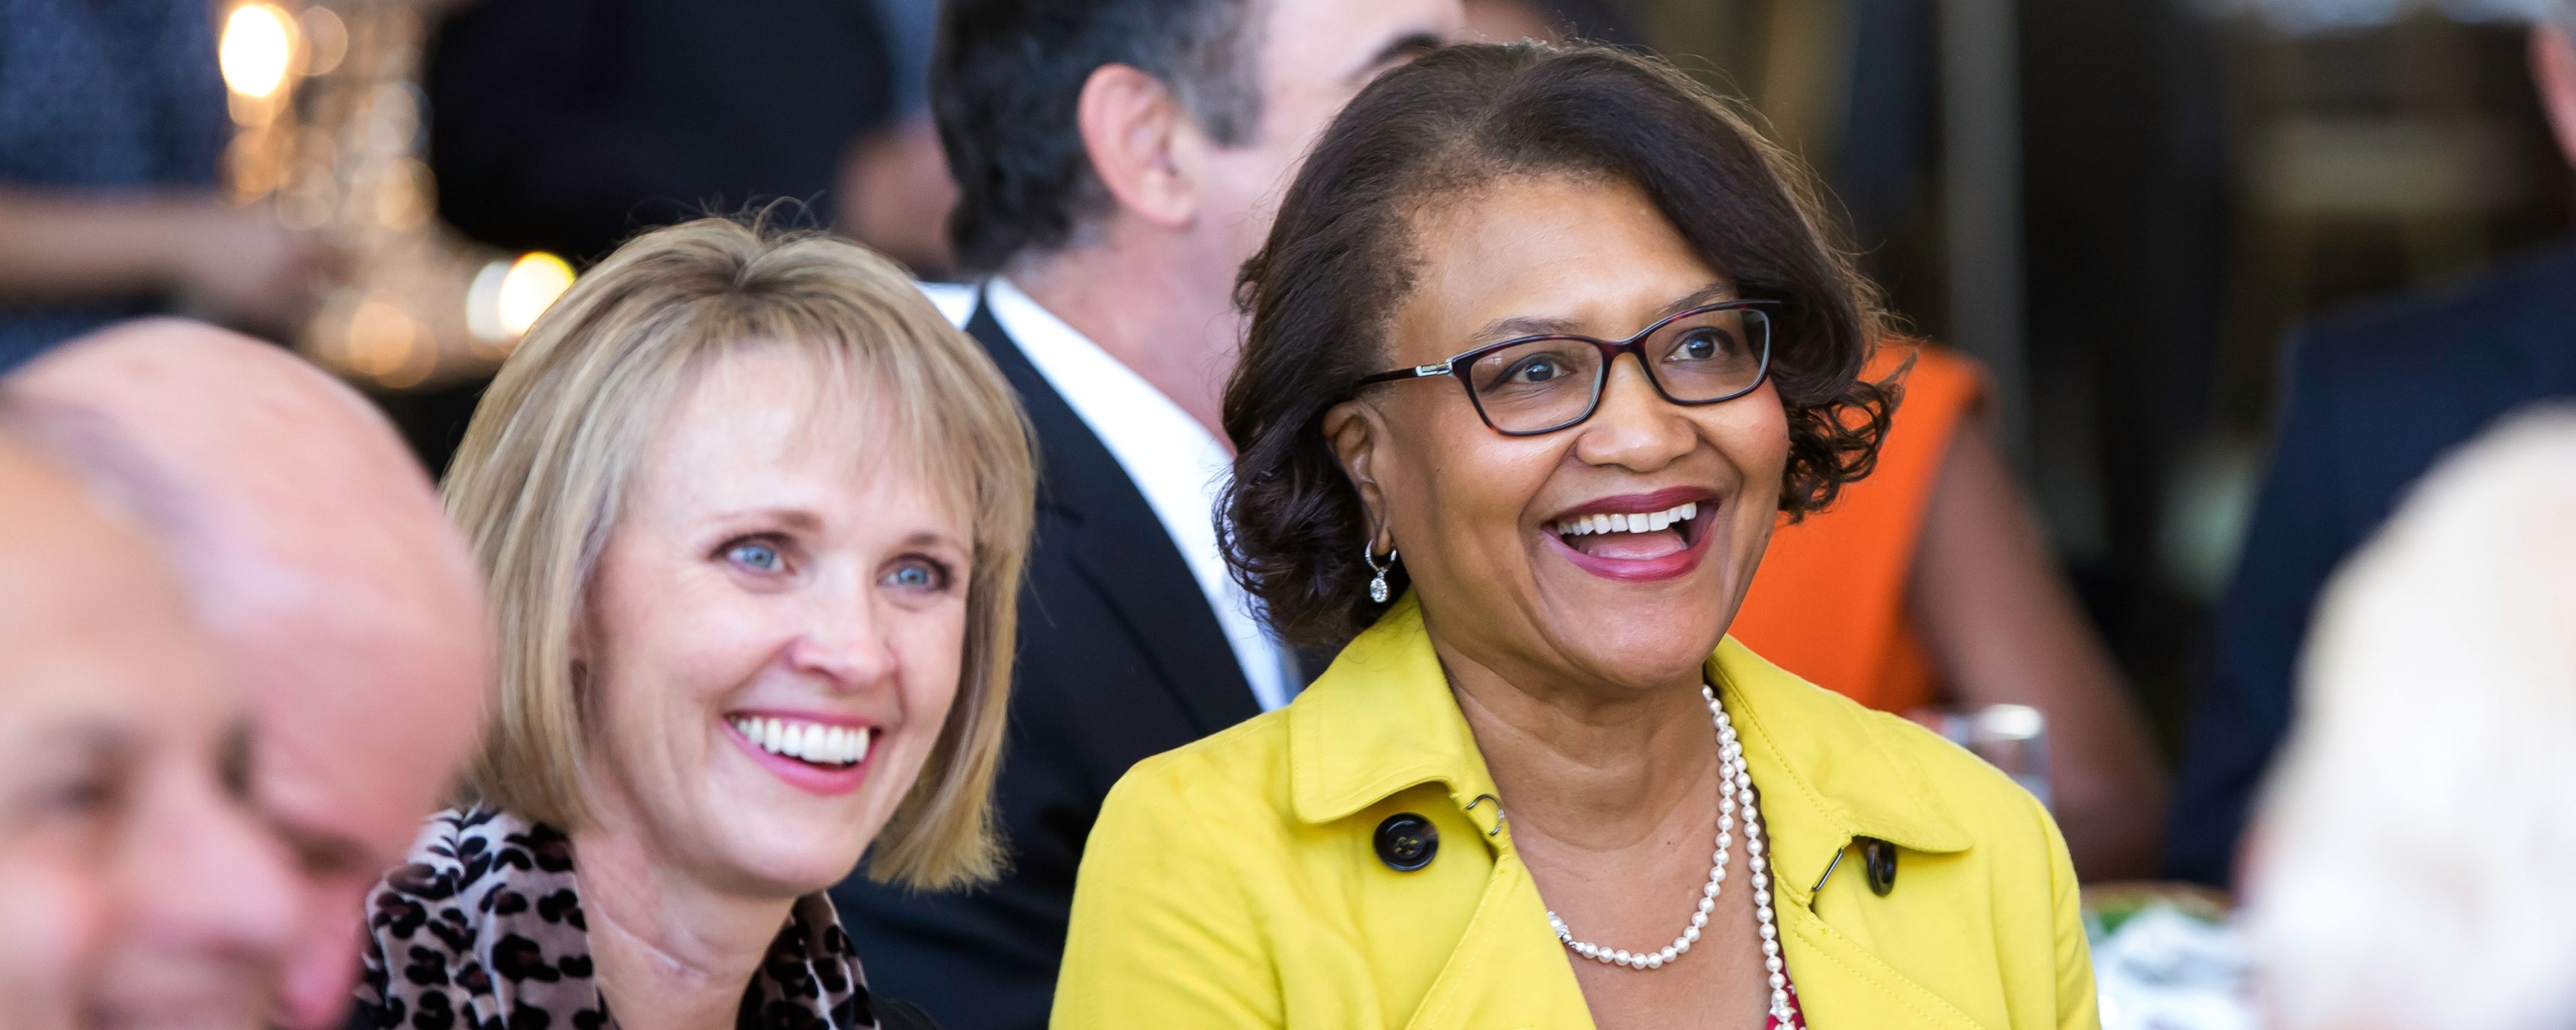 Dr. Batchlor, a middle-aged Black woman, smiling while surrounded by others at the event